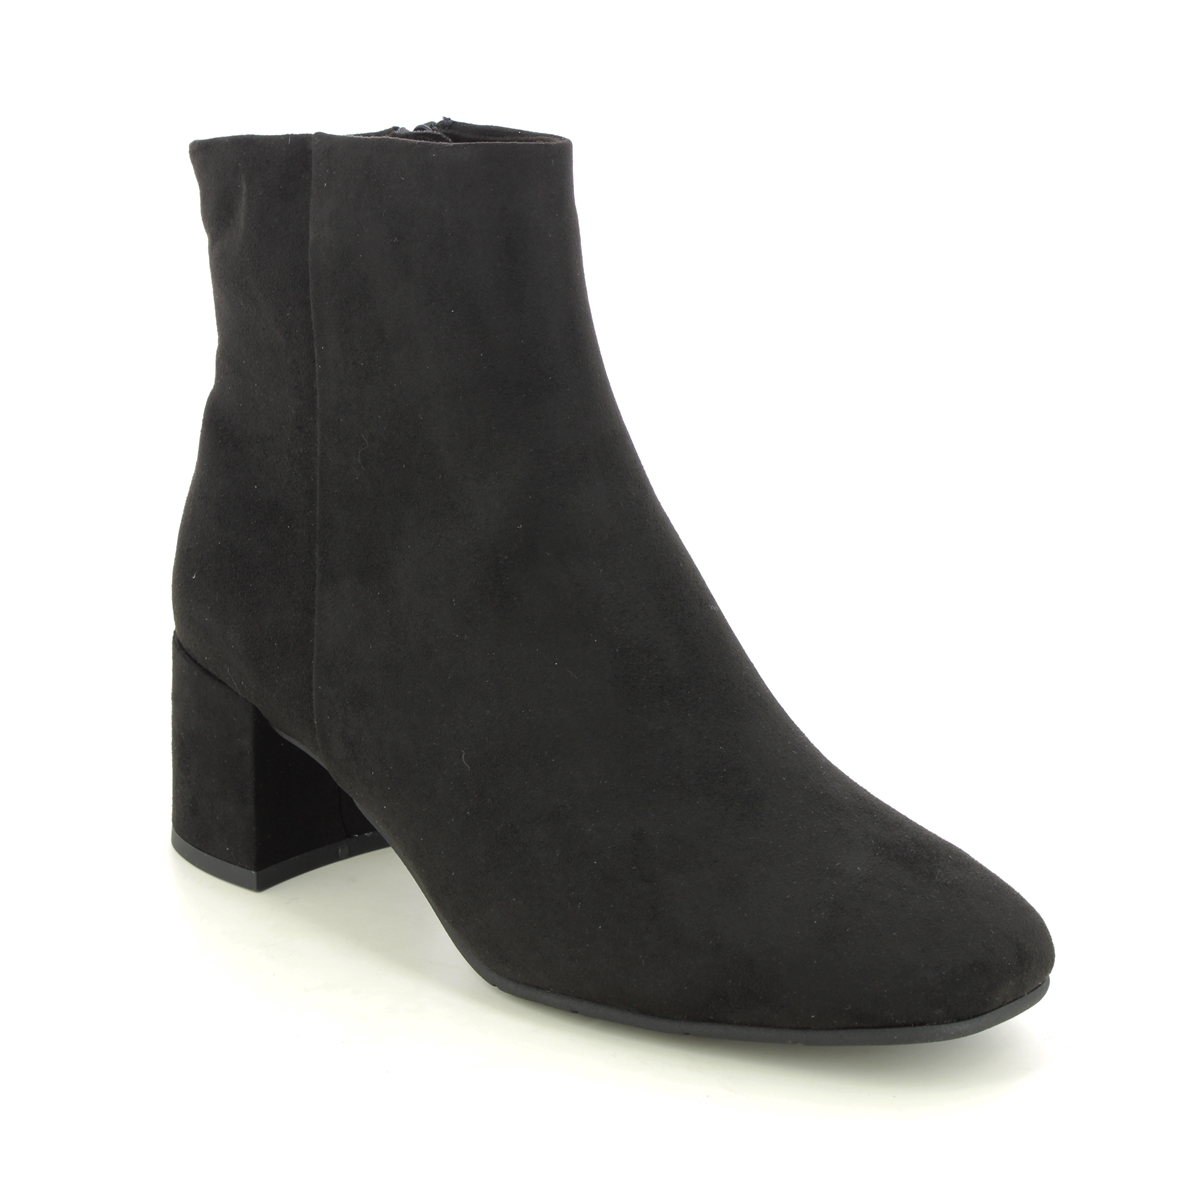 Marco Tozzi Vacco Black Womens Heeled Boots 25349-41-001 In Size 37 In Plain Black